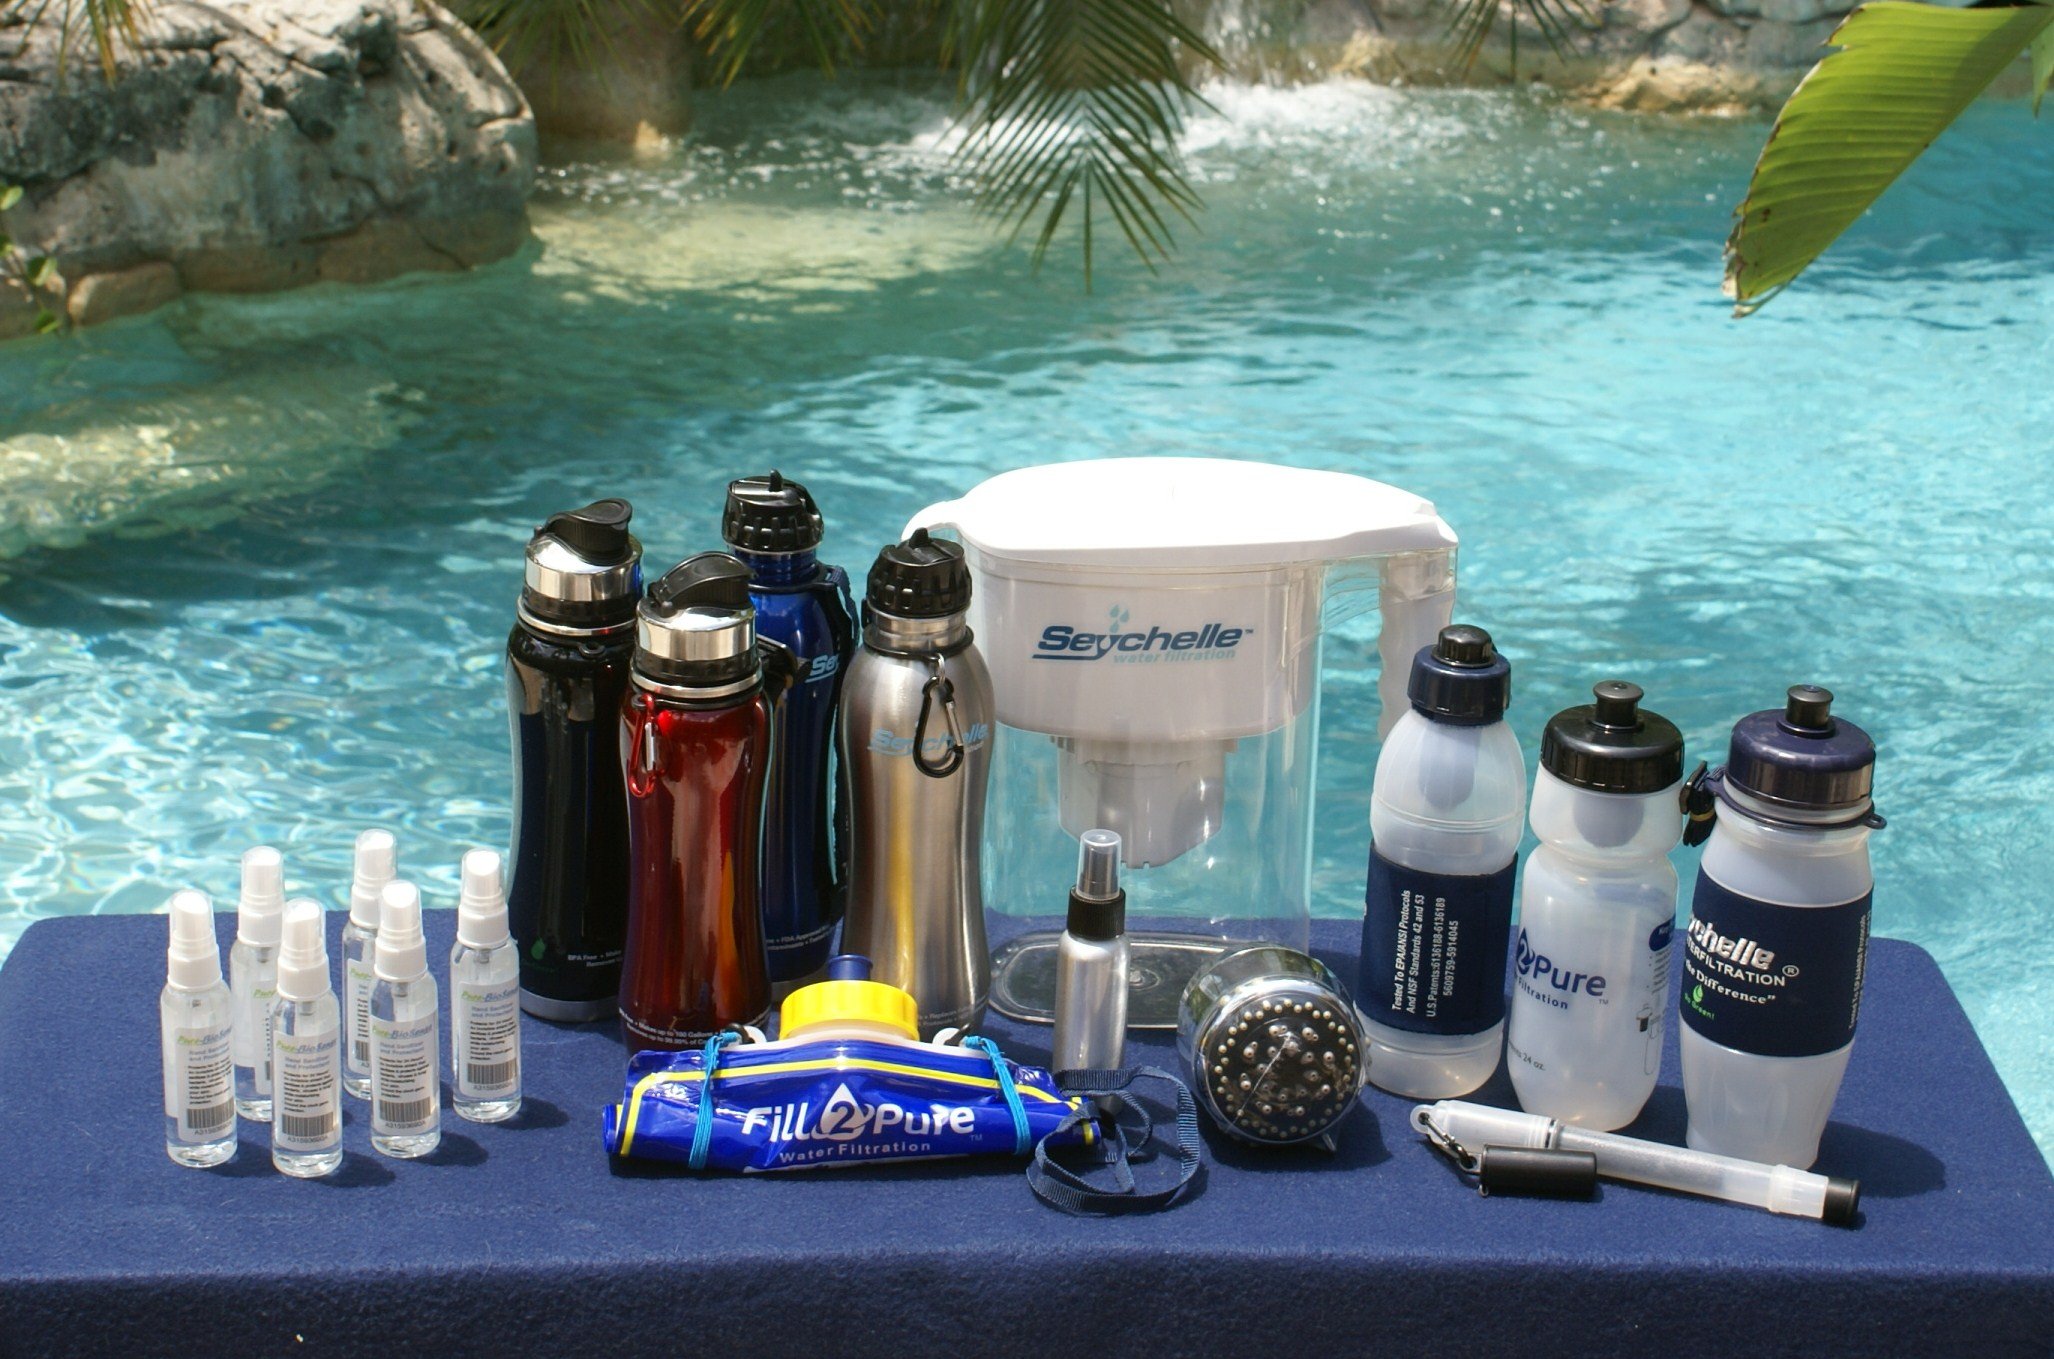 Seychelle Water Filter Reviews